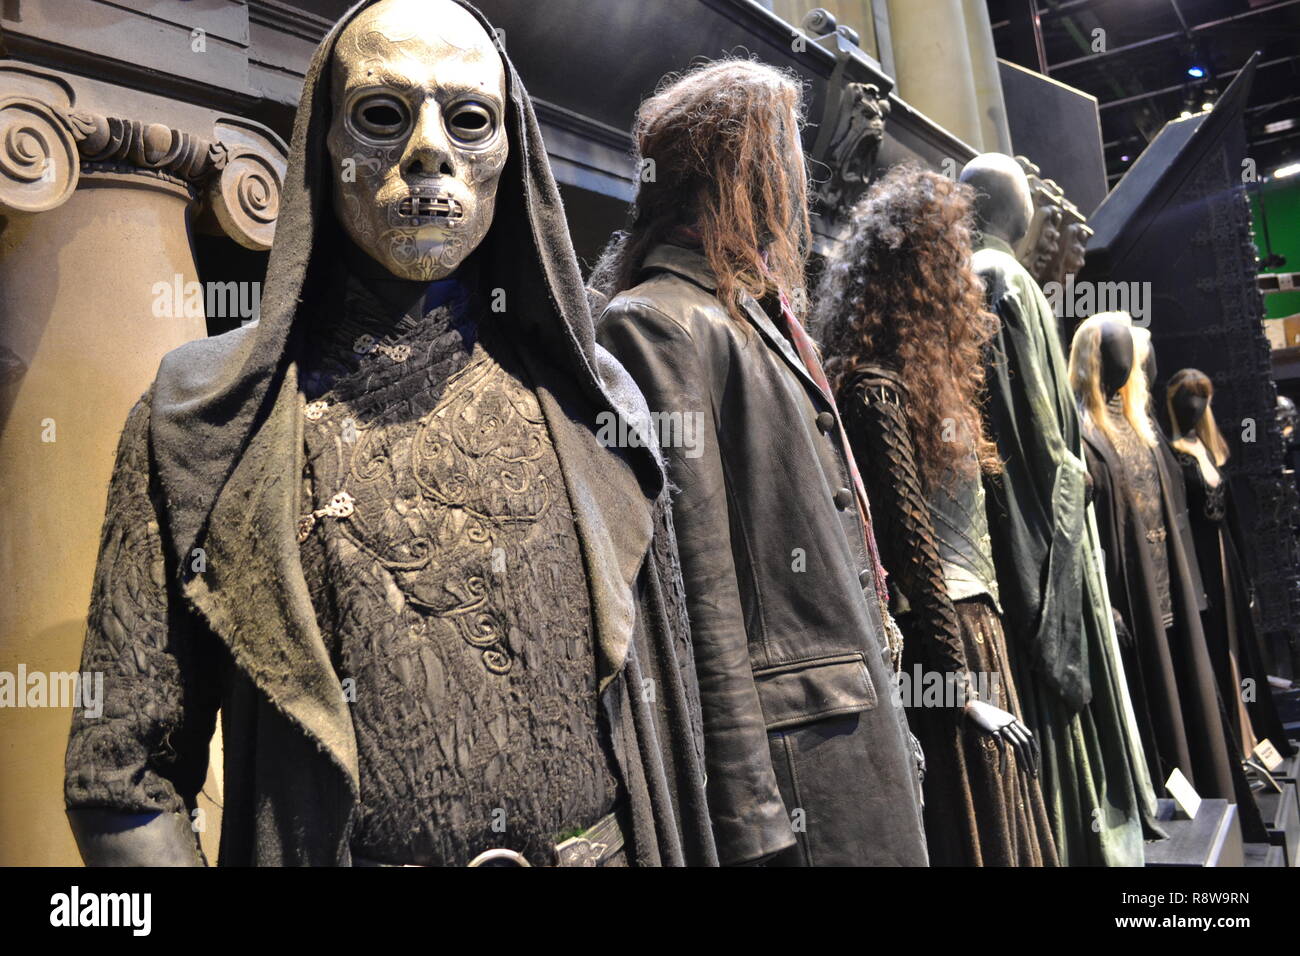 Death Eater, Valdemort, Fenrir Greyback, & Malfoy outfits at the Harry  Potter Studios at Leavesden, London, UK. Mask from the Order of the Phoenix  Stock Photo - Alamy